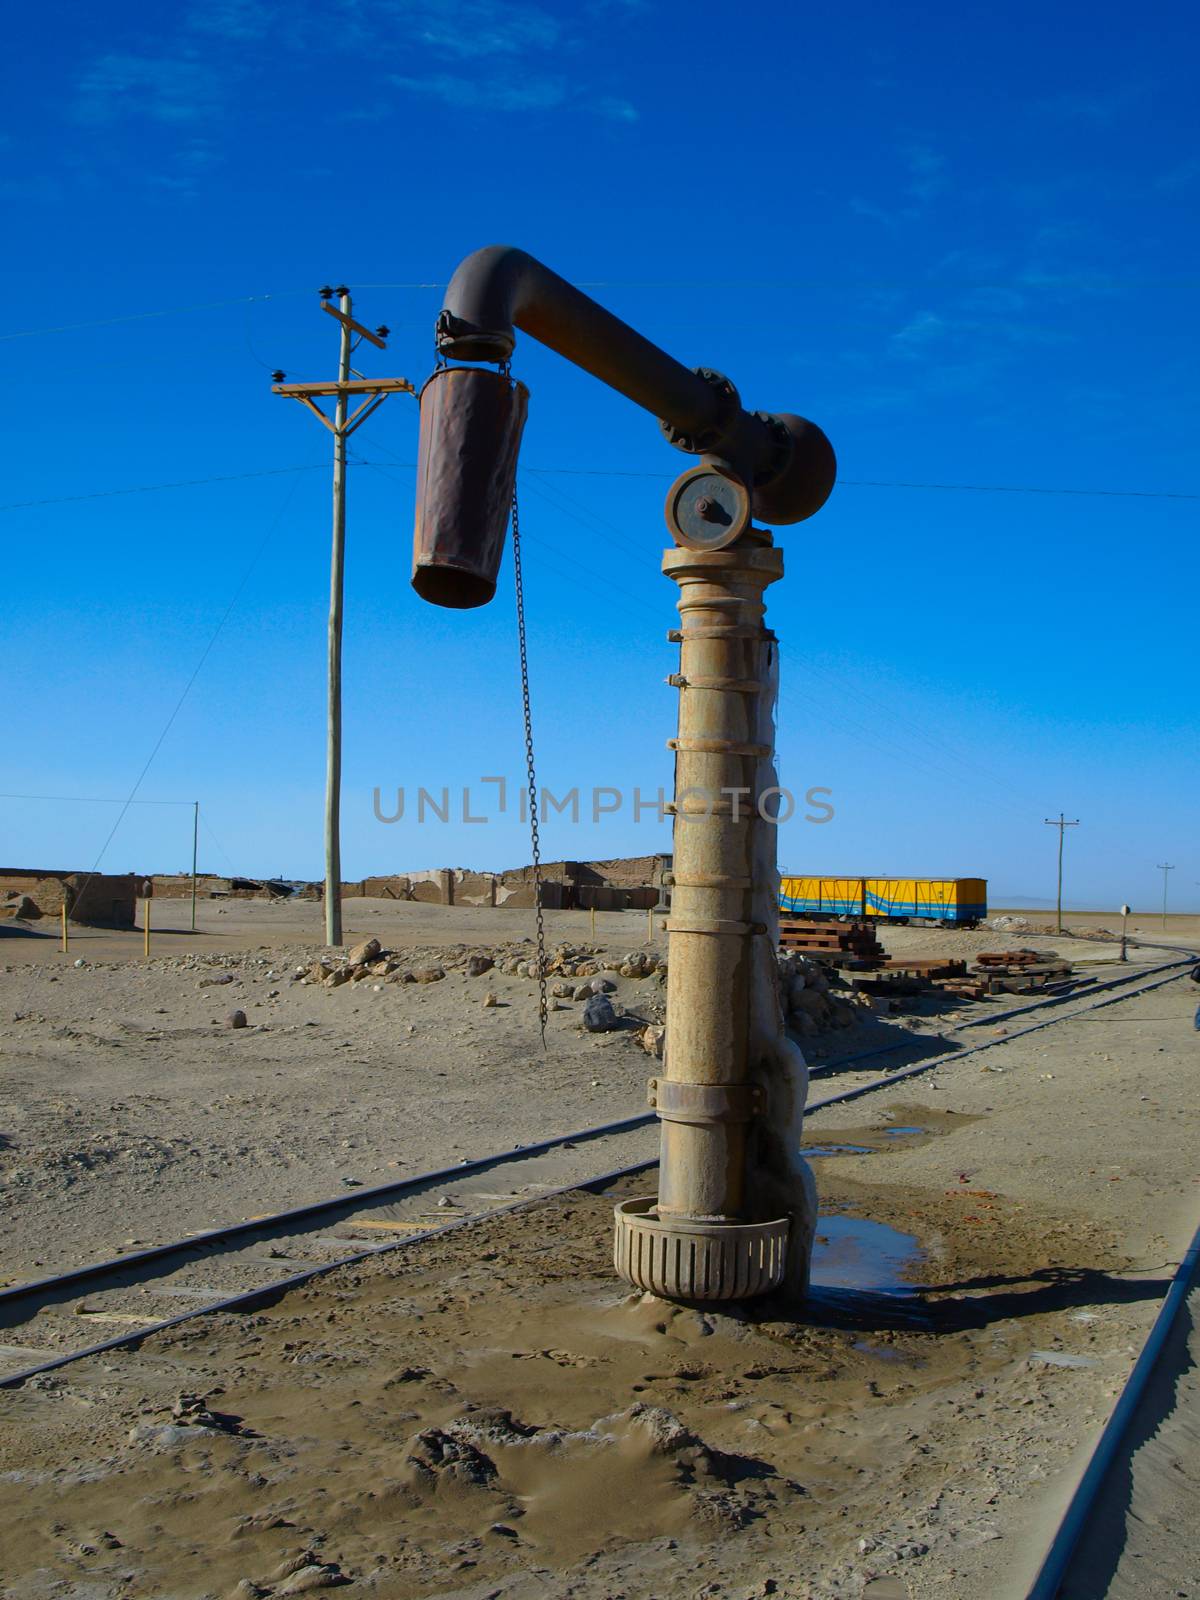 Railway water pump by pyty